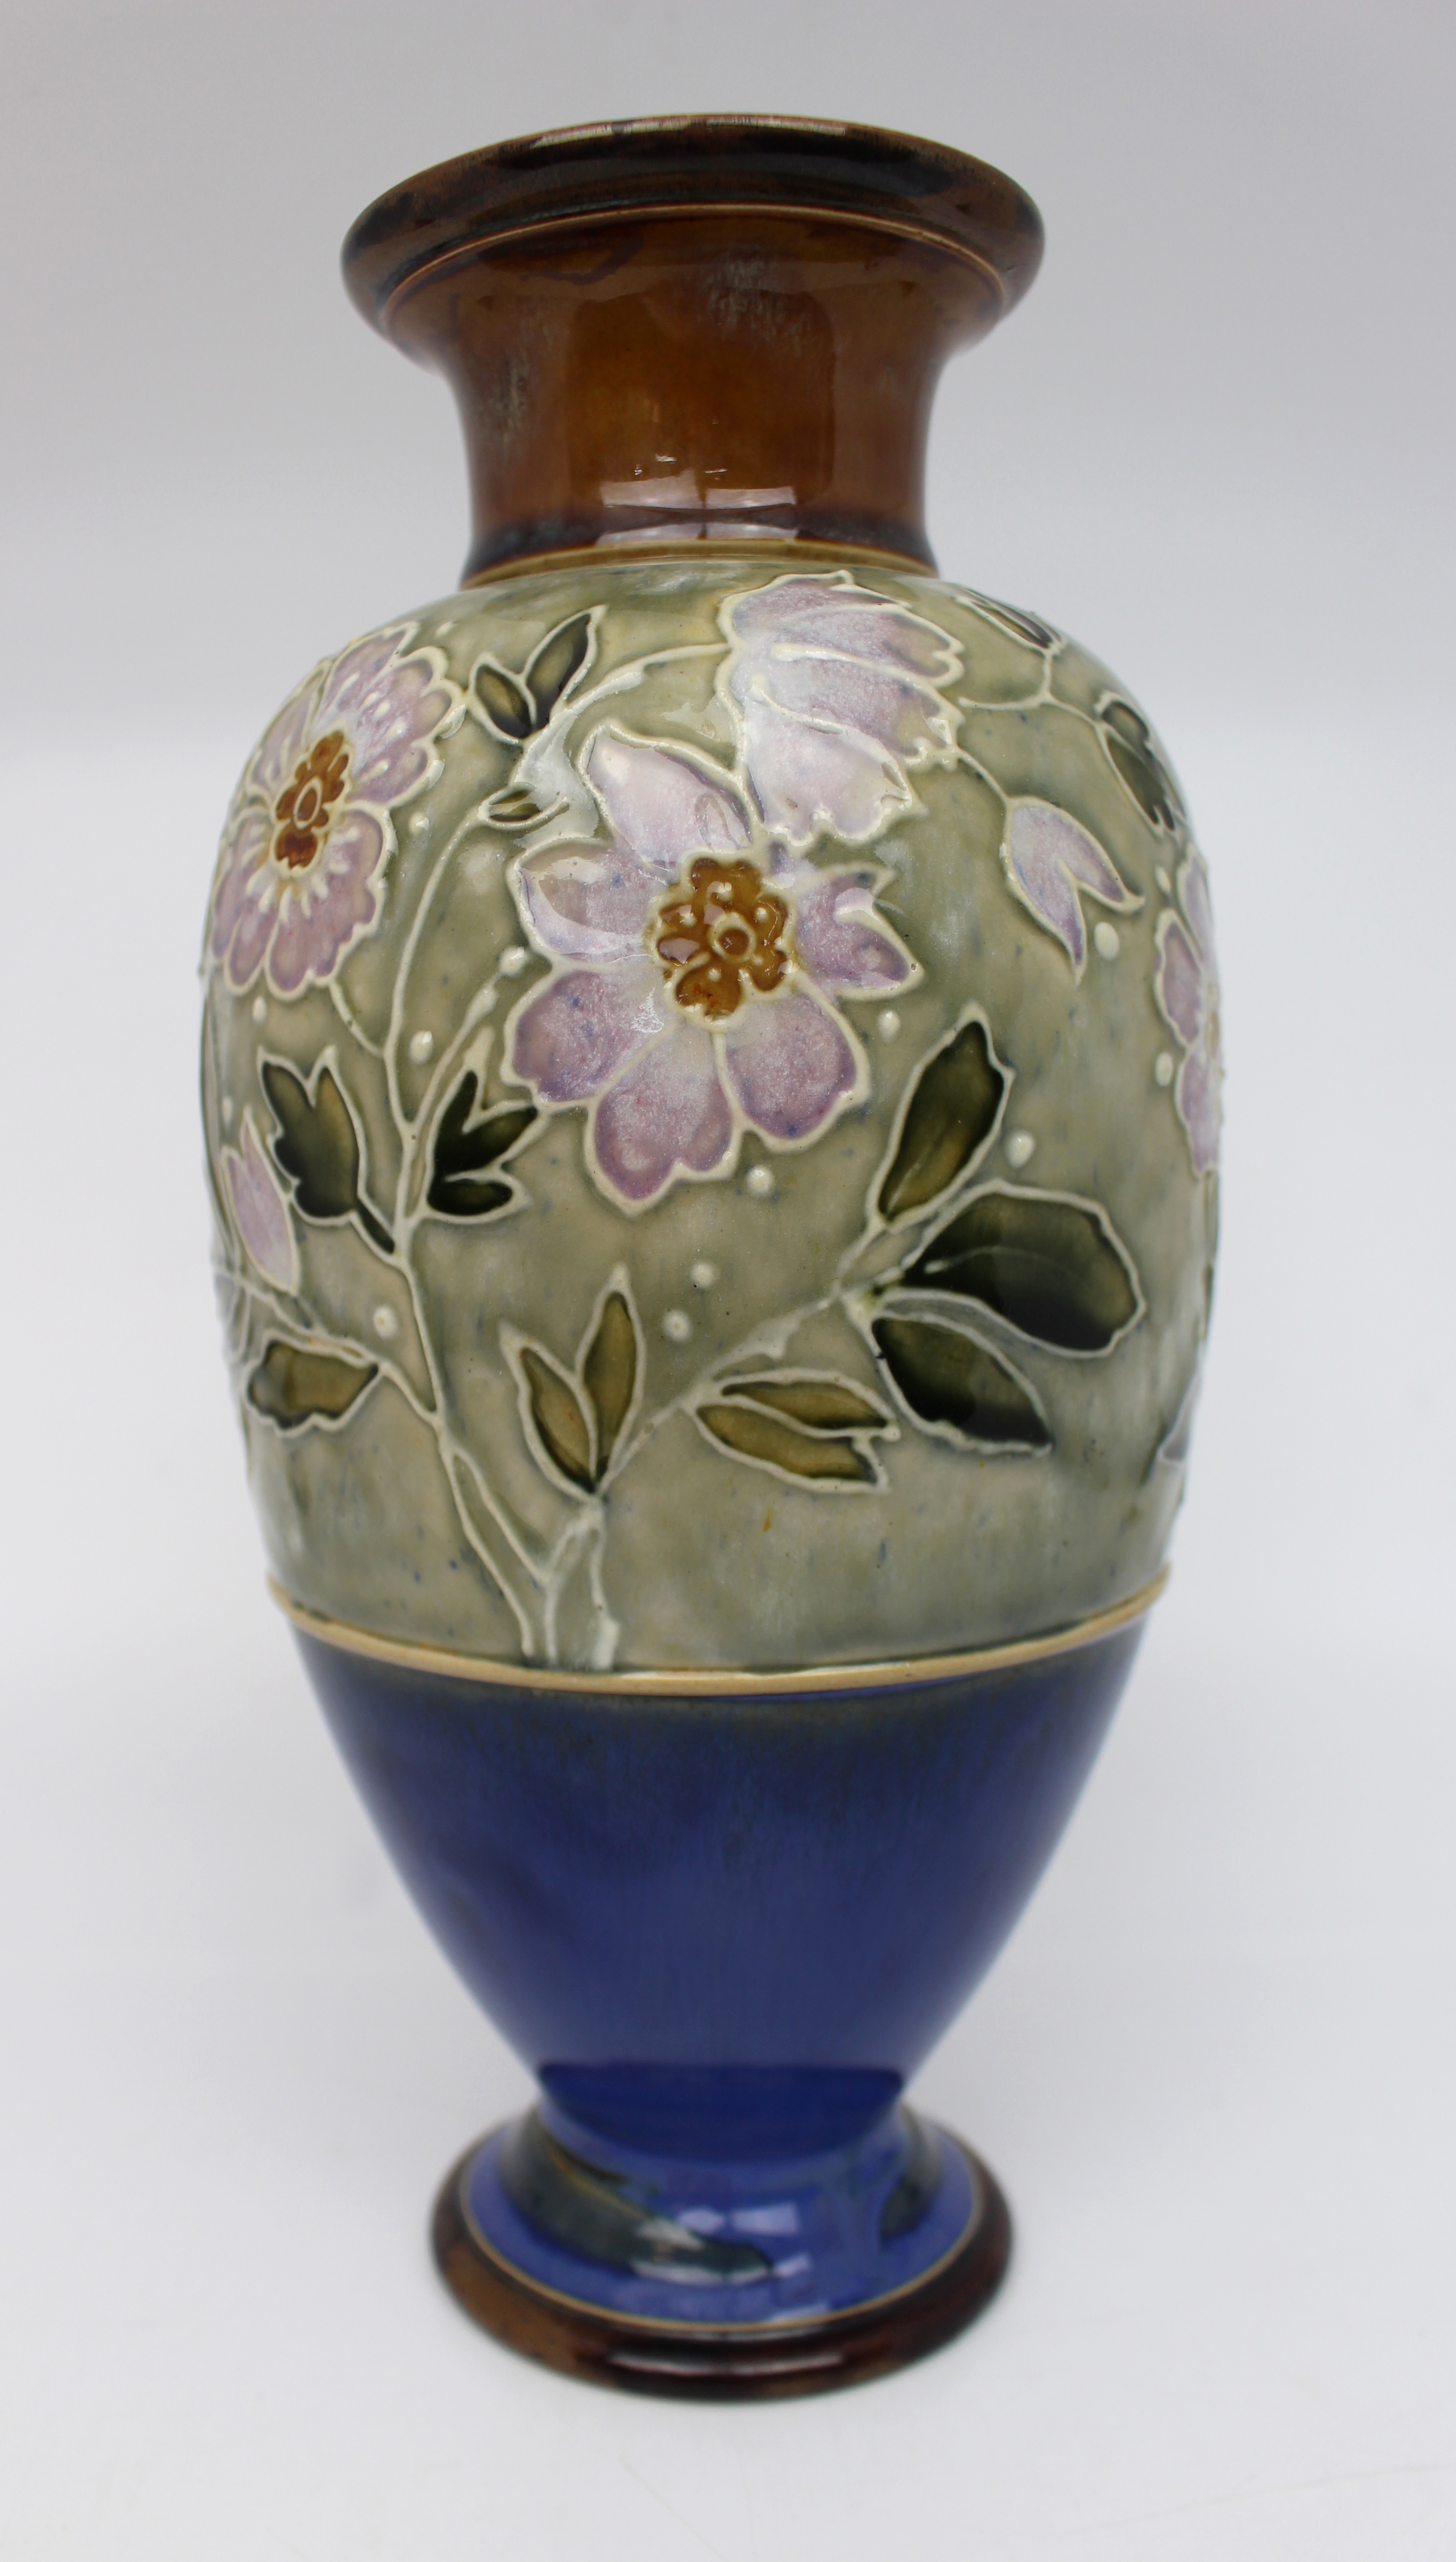 Early 20th C. Royal Doulton Vase - Image 3 of 4